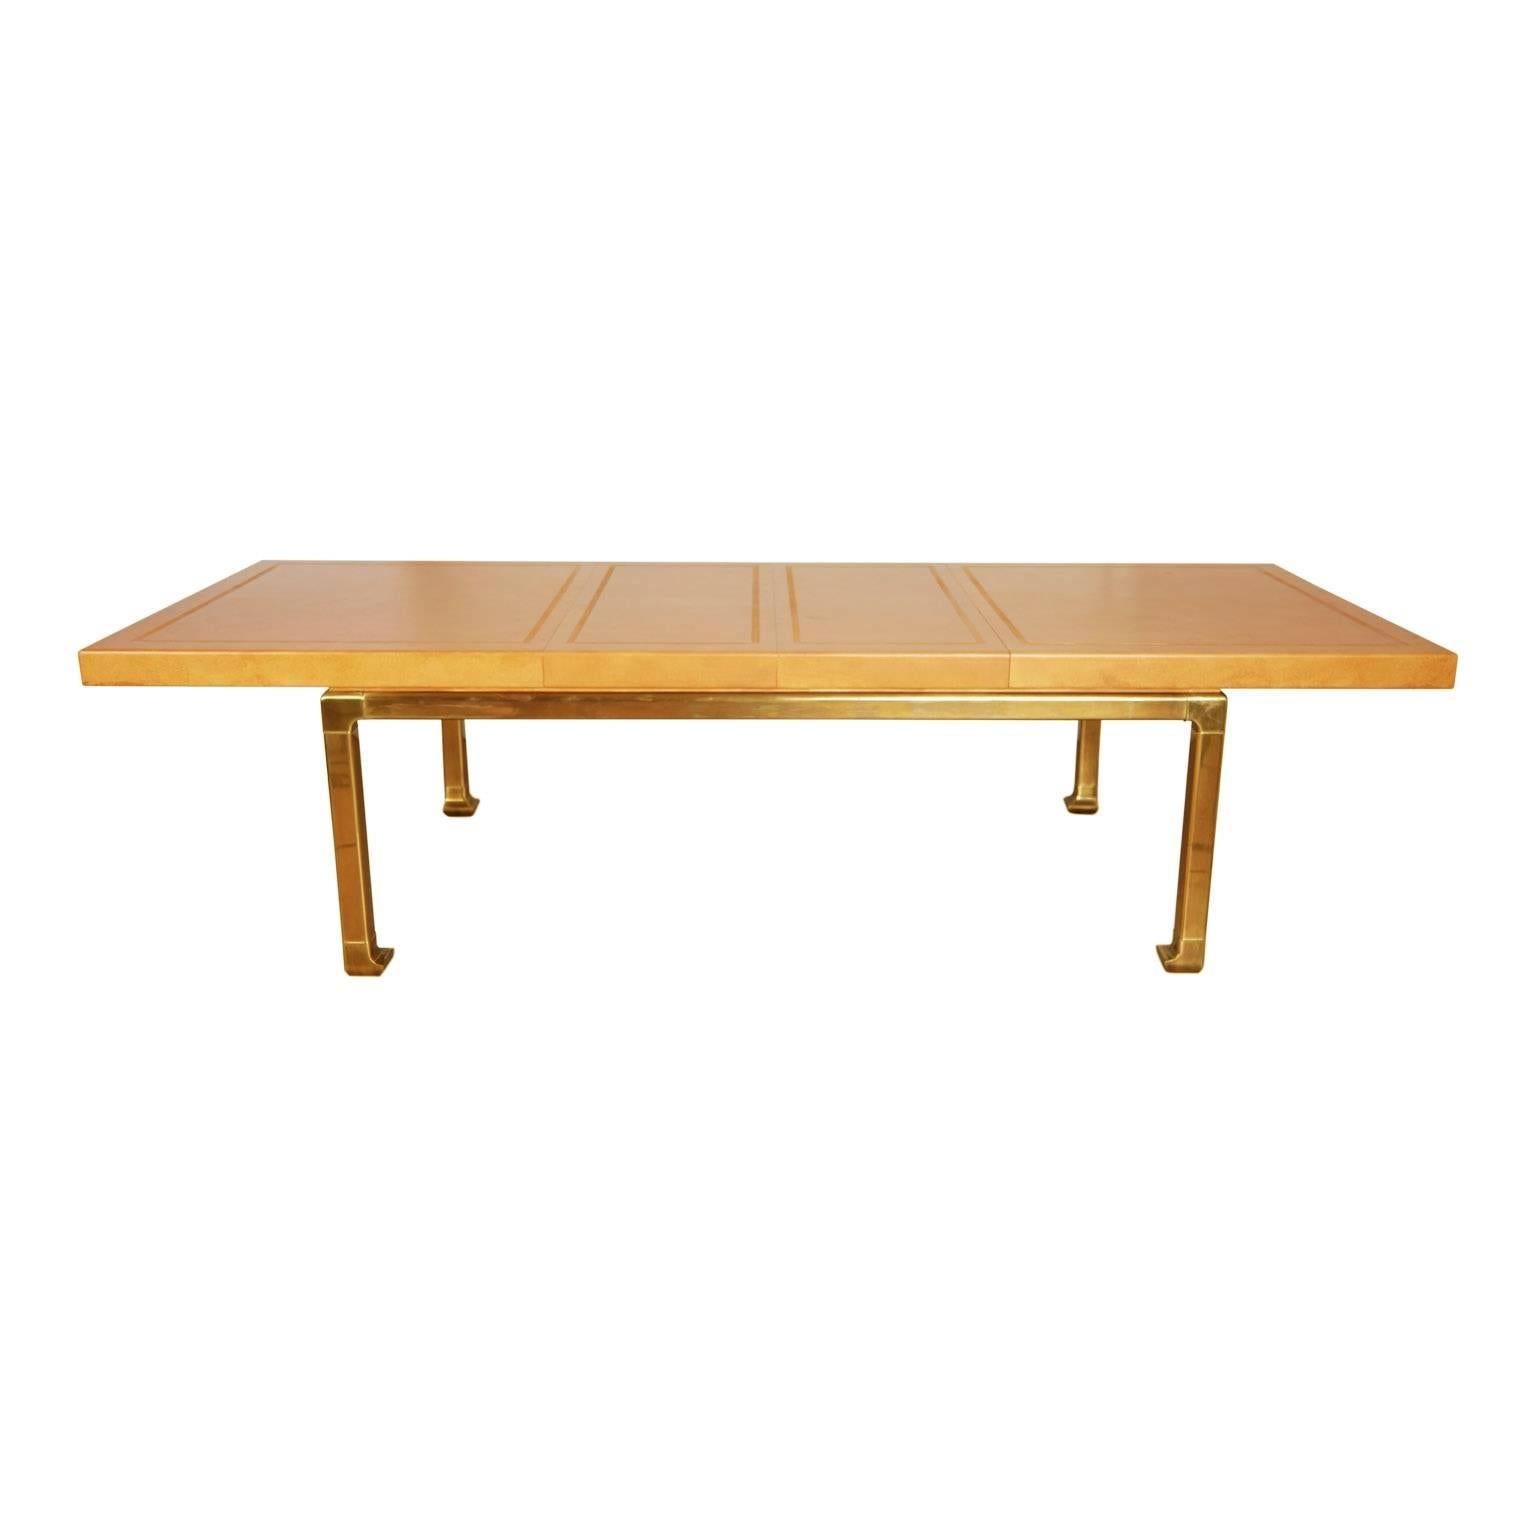 Extraordinary custom-made expandable table from Mastercraft that is just shy of 10ft at its widest. This exceptional piece features a lacquered faux ostrich skin top over wood with embossed patterned border and sturdy luminescent on-trend brass